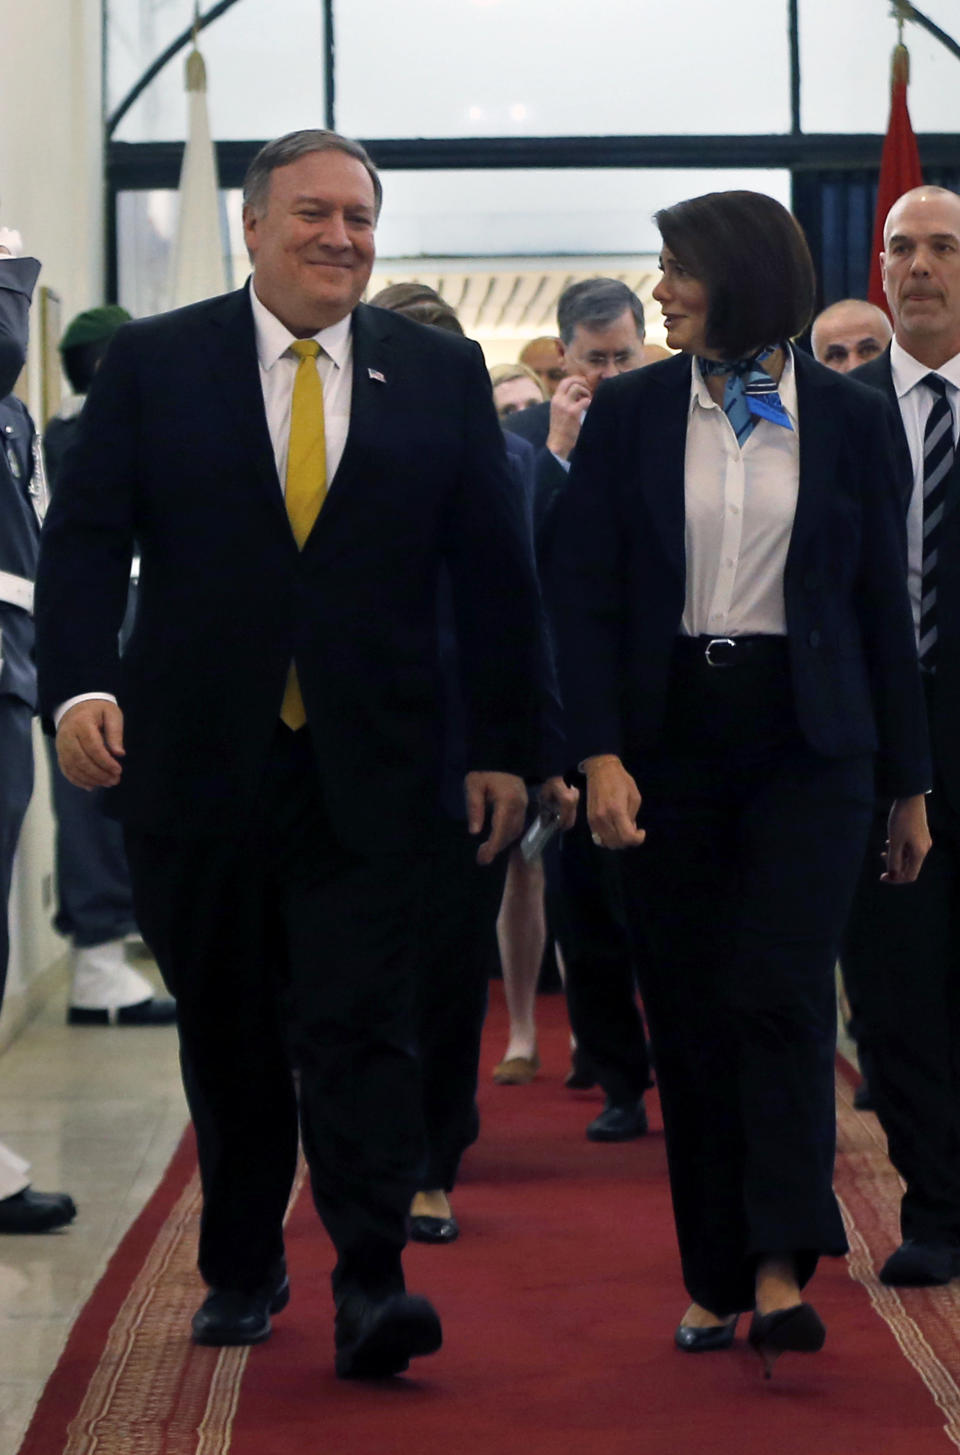 Lebanon's Interior Minister Raya El Hassan, right, walks with U.S. Secretary of State Mike Pompeo, at the interior ministry in Beirut, Lebanon, Friday, March 22, 2019. Pompeo has arrived in Lebanon, the last leg of a Mideast tour that also took him to Kuwait and Israel. (AP Photo/Bilal Hussein)